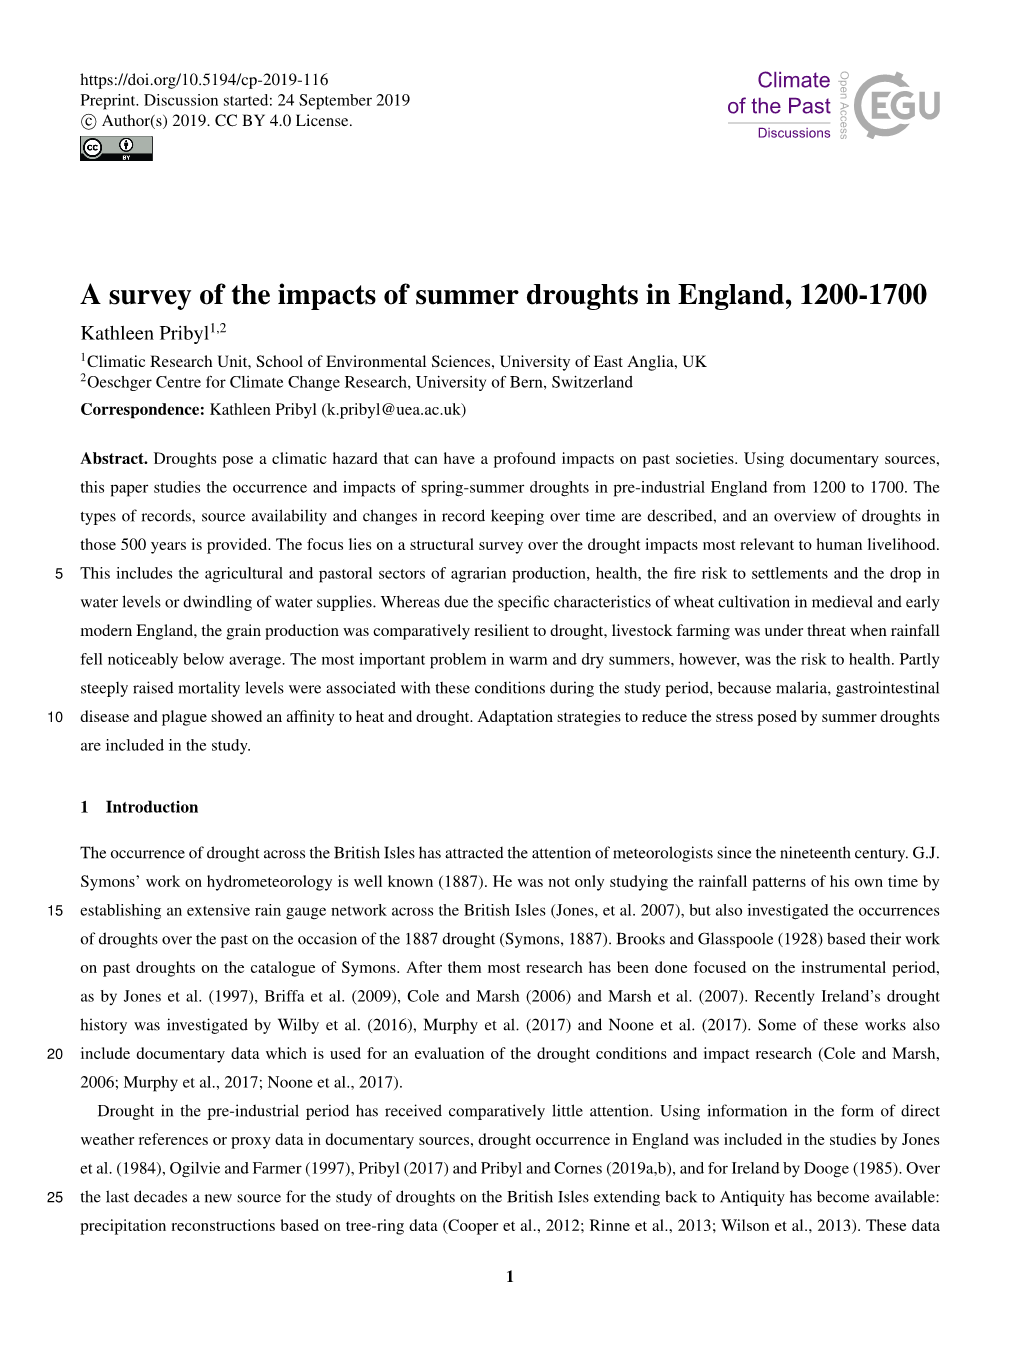 A Survey of the Impacts of Summer Droughts in England, 1200-1700